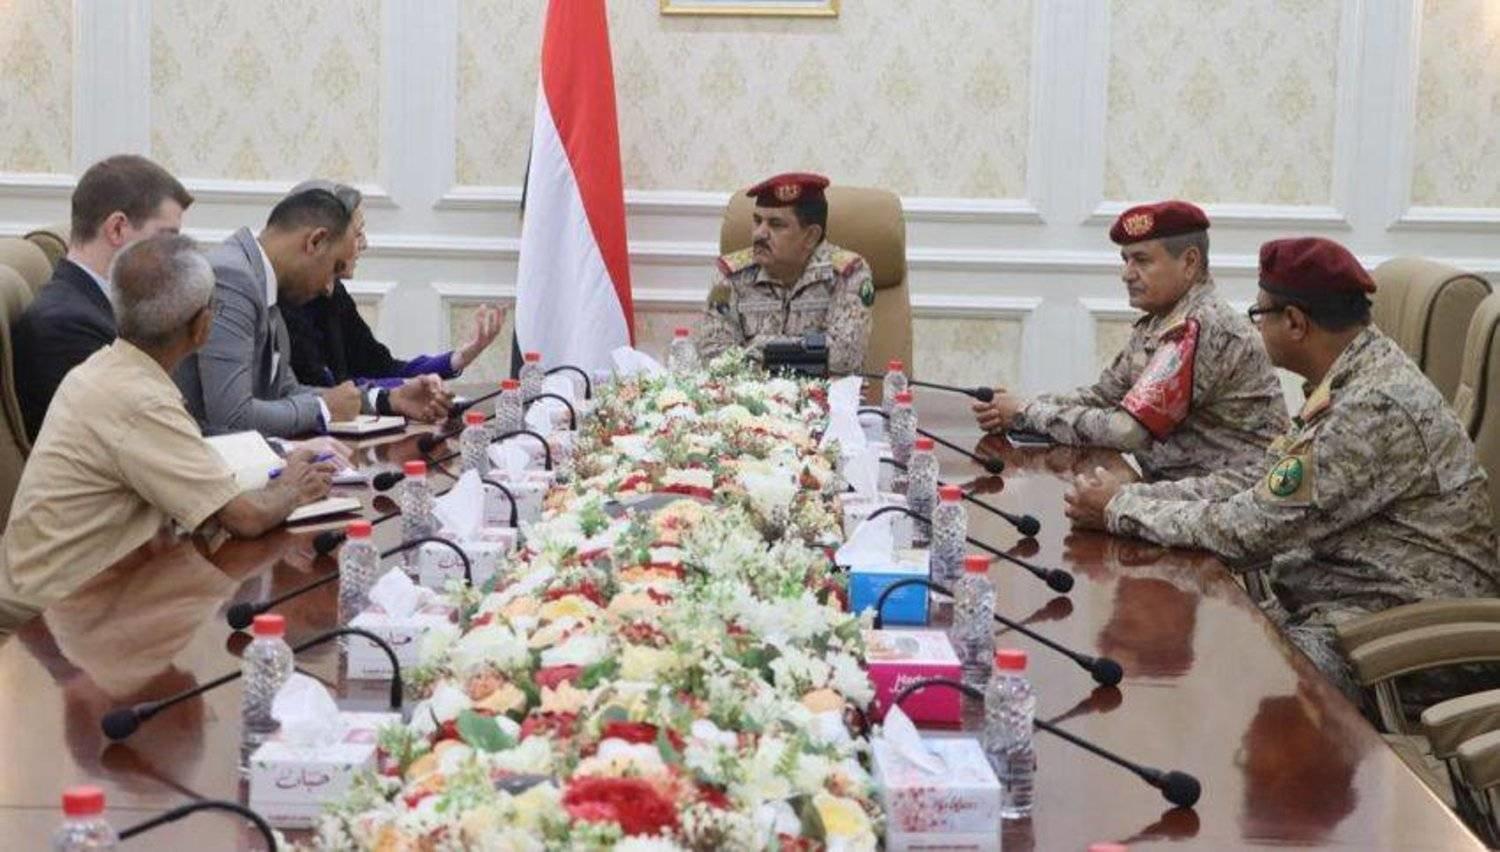 Yemen Defense Ministry Warns of Houthi Collusion with ISIS and Qaeda